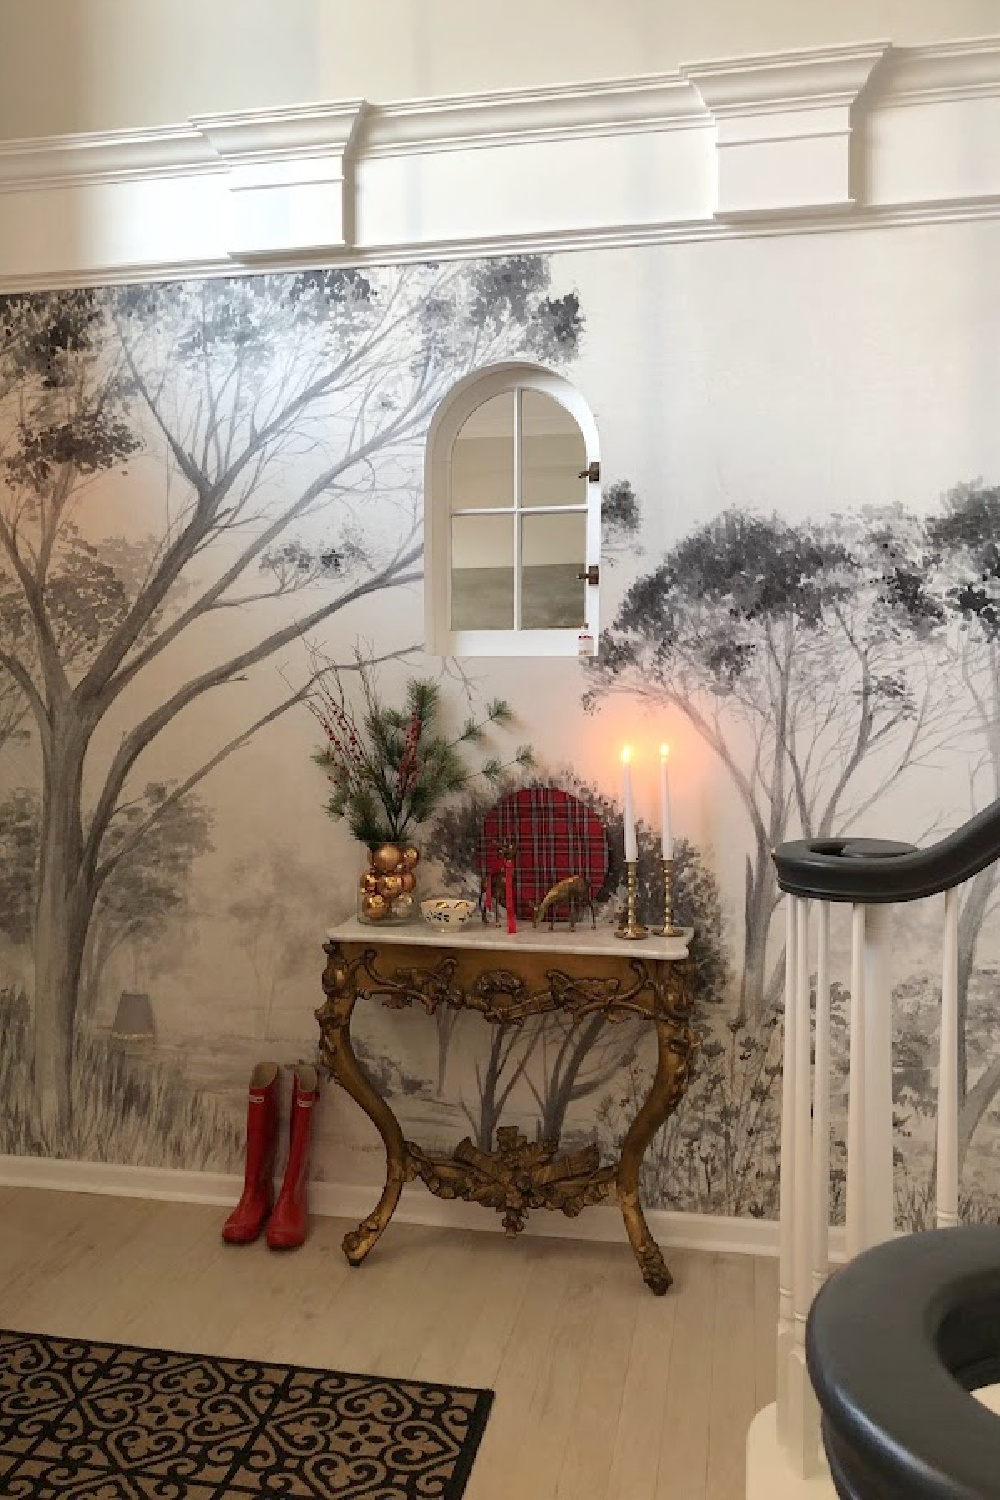 Crown molding, tree wallpaper, and marble topped antique French console table in entry with holiday decor - Hello Lovely Studio.